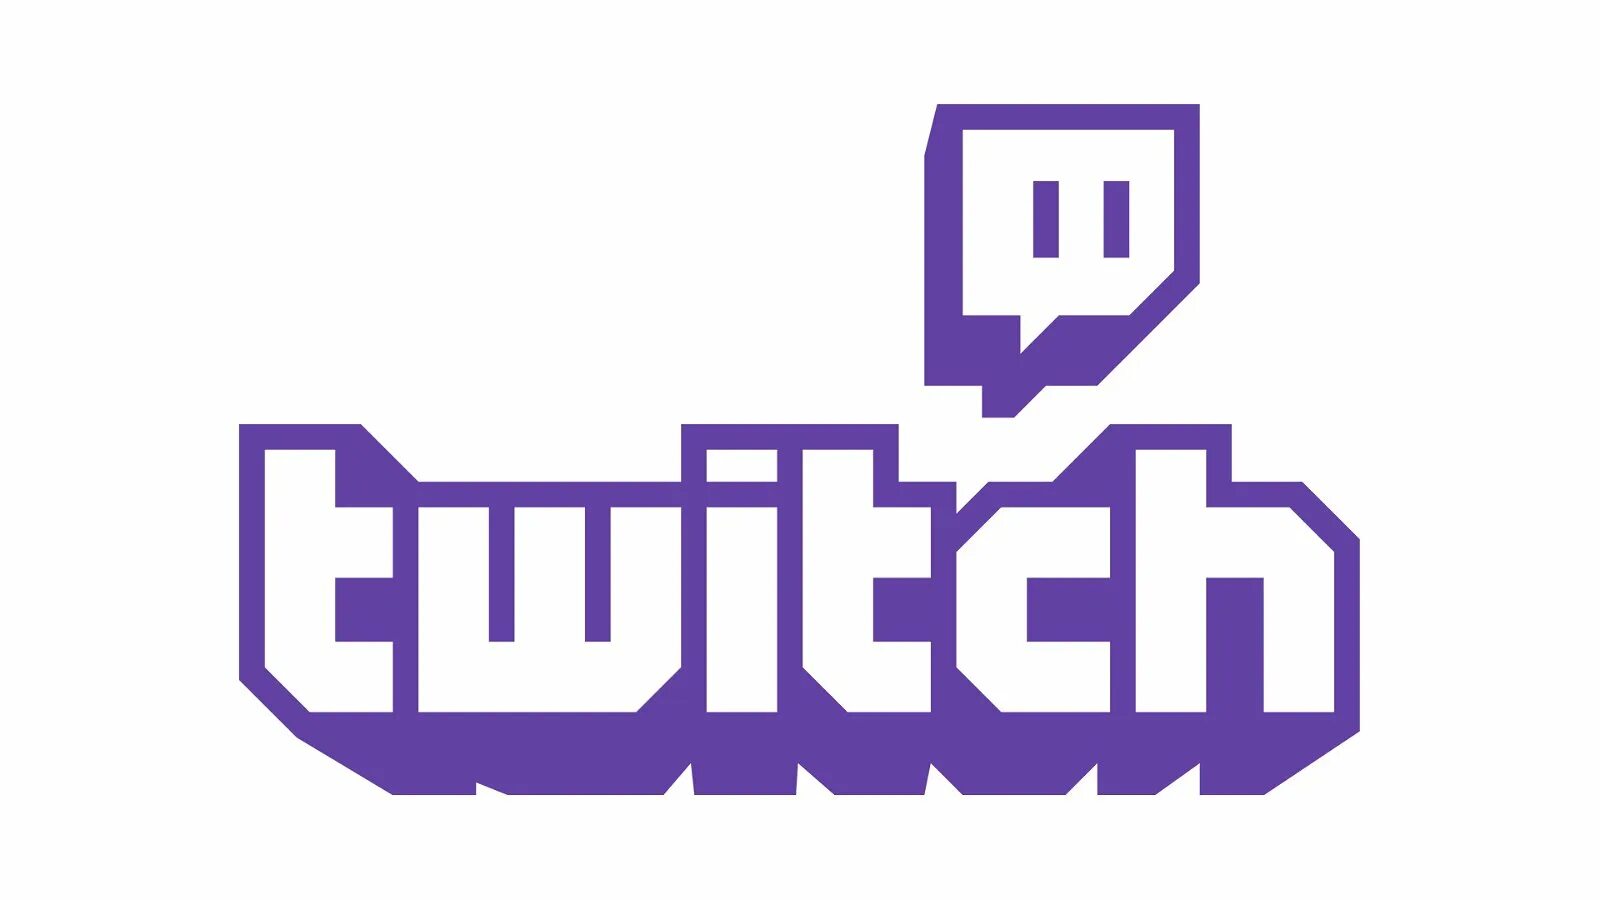 Https twitch. VIP twitch PNG. Повязка twitch PNG. 1st badge twitch PNG.